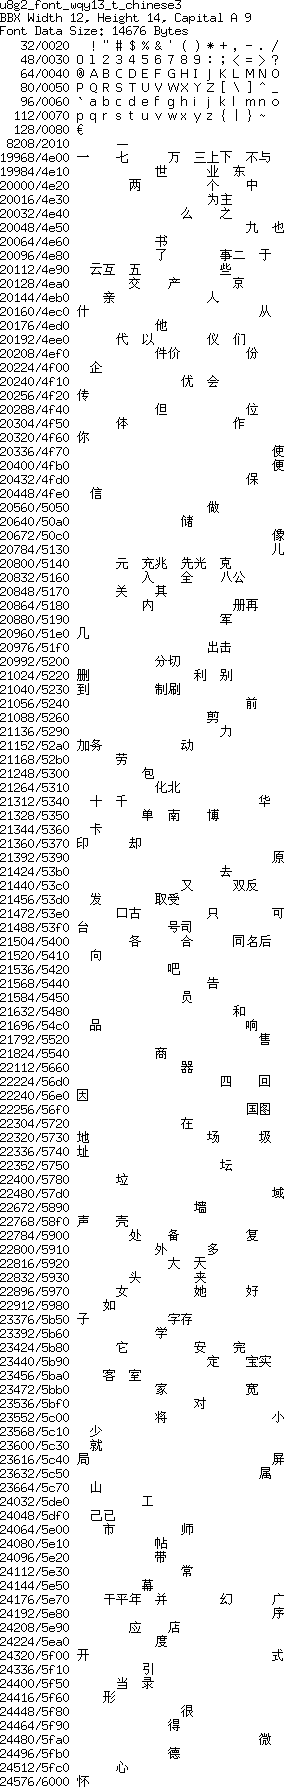 fntpic/u8g2_font_wqy13_t_chinese3.png